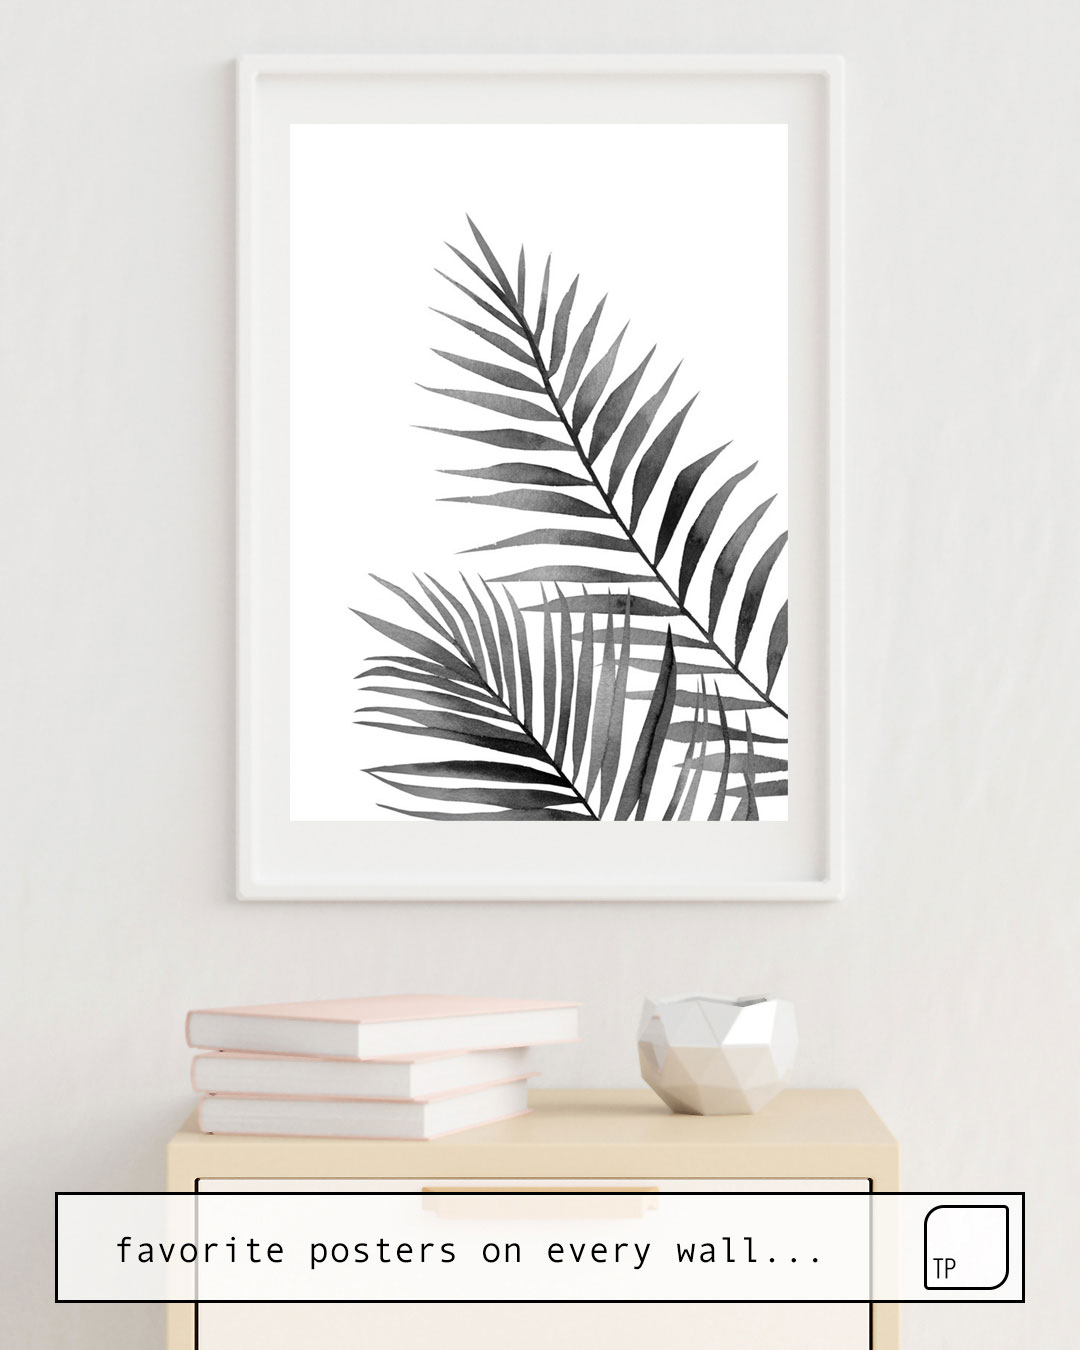 The photo shows an example of furnishing with the motif MONOCHROME PALM BRANCHES. by Art by ASolo as mural